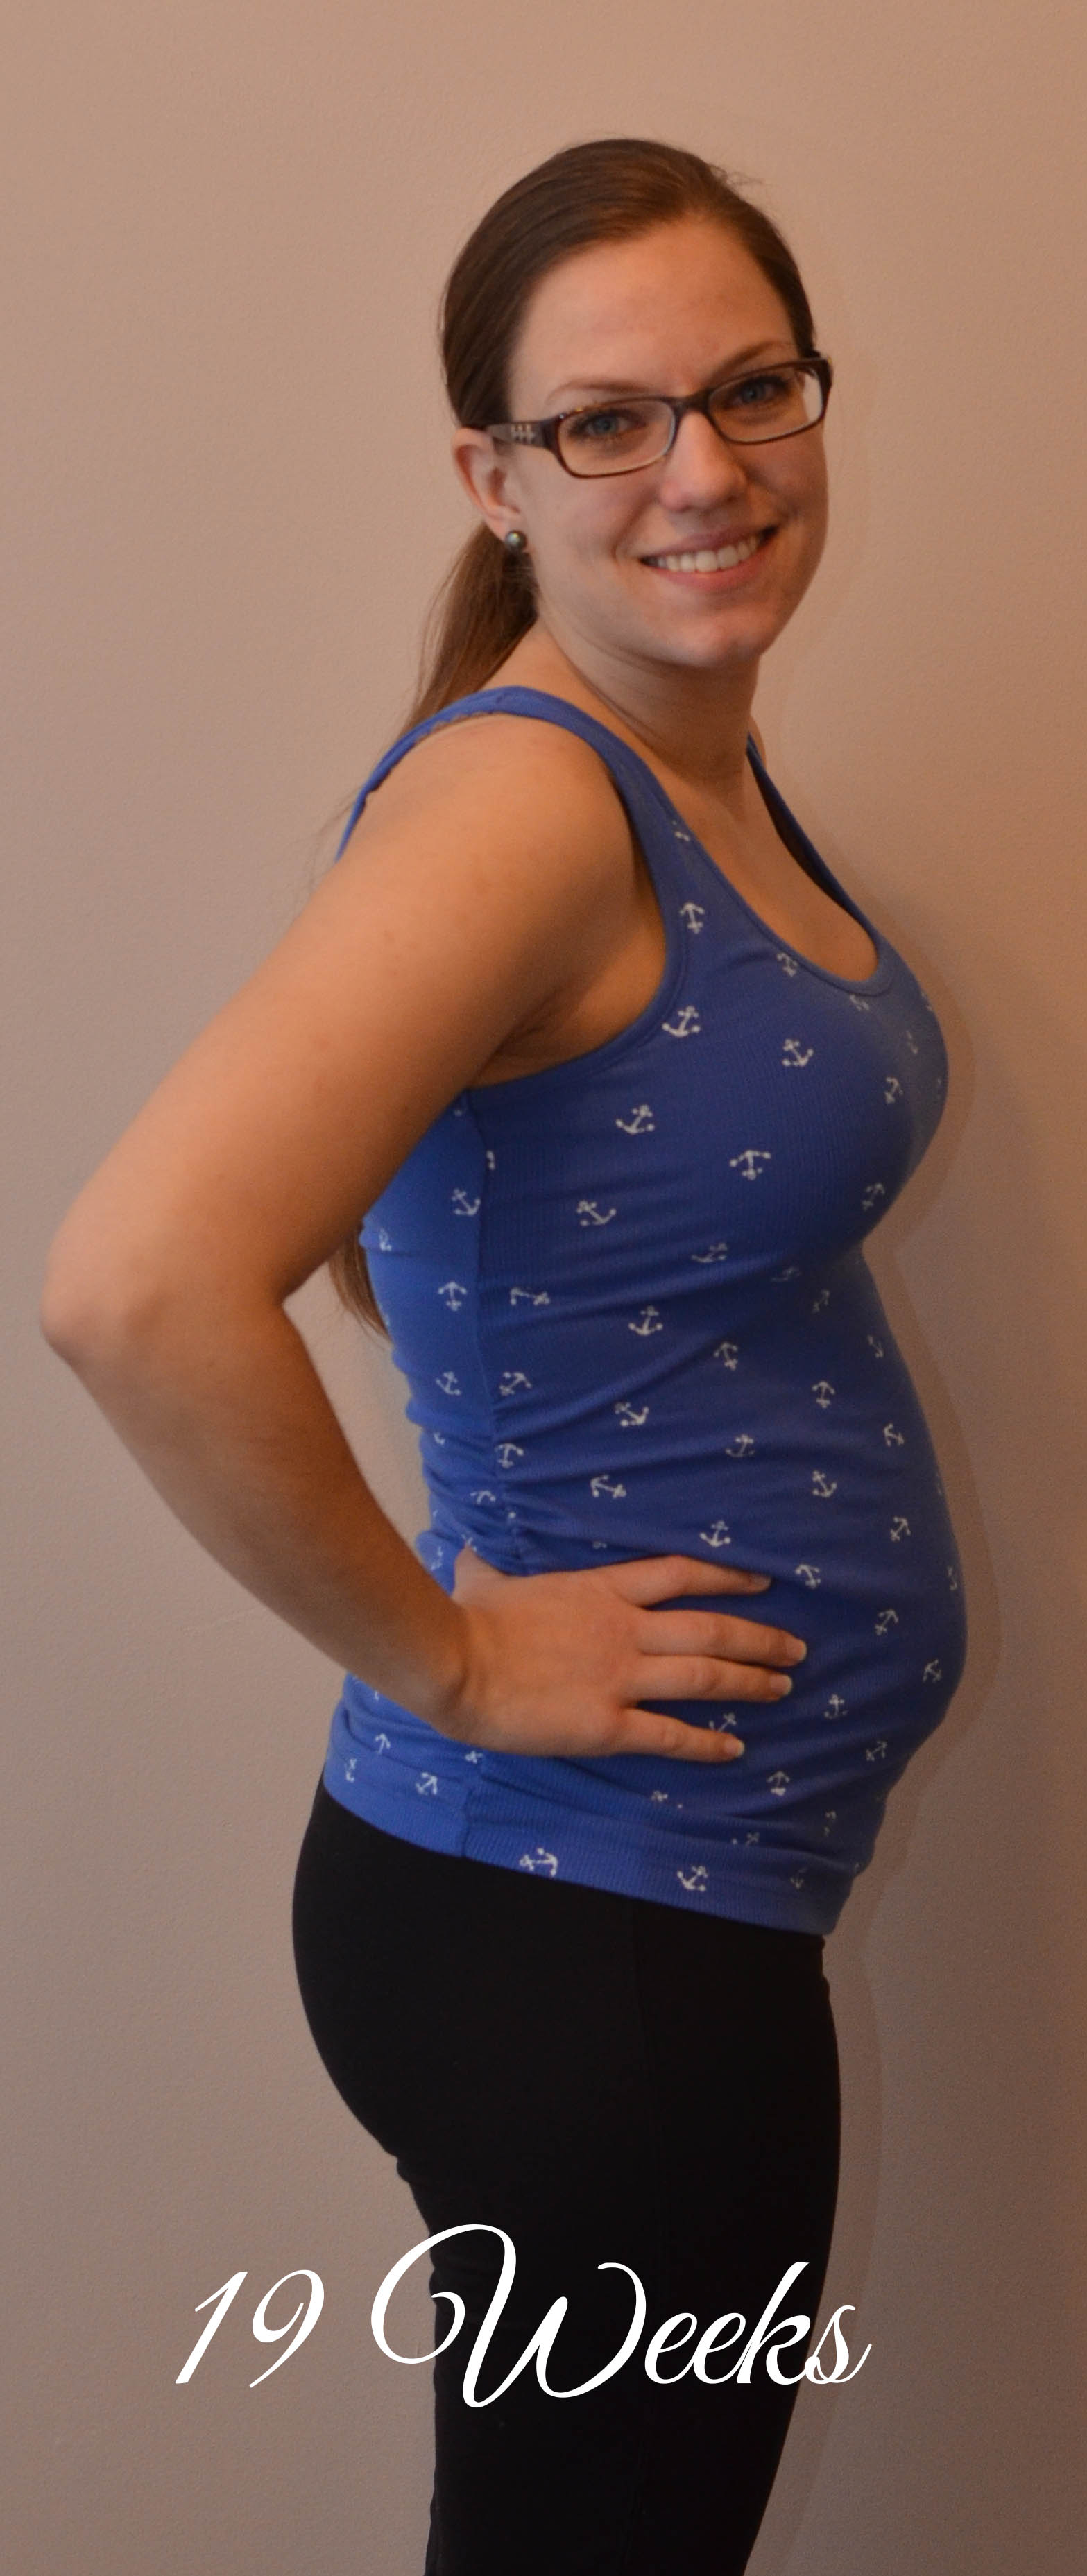 jobs to do at 19 weeks pregnant pictures